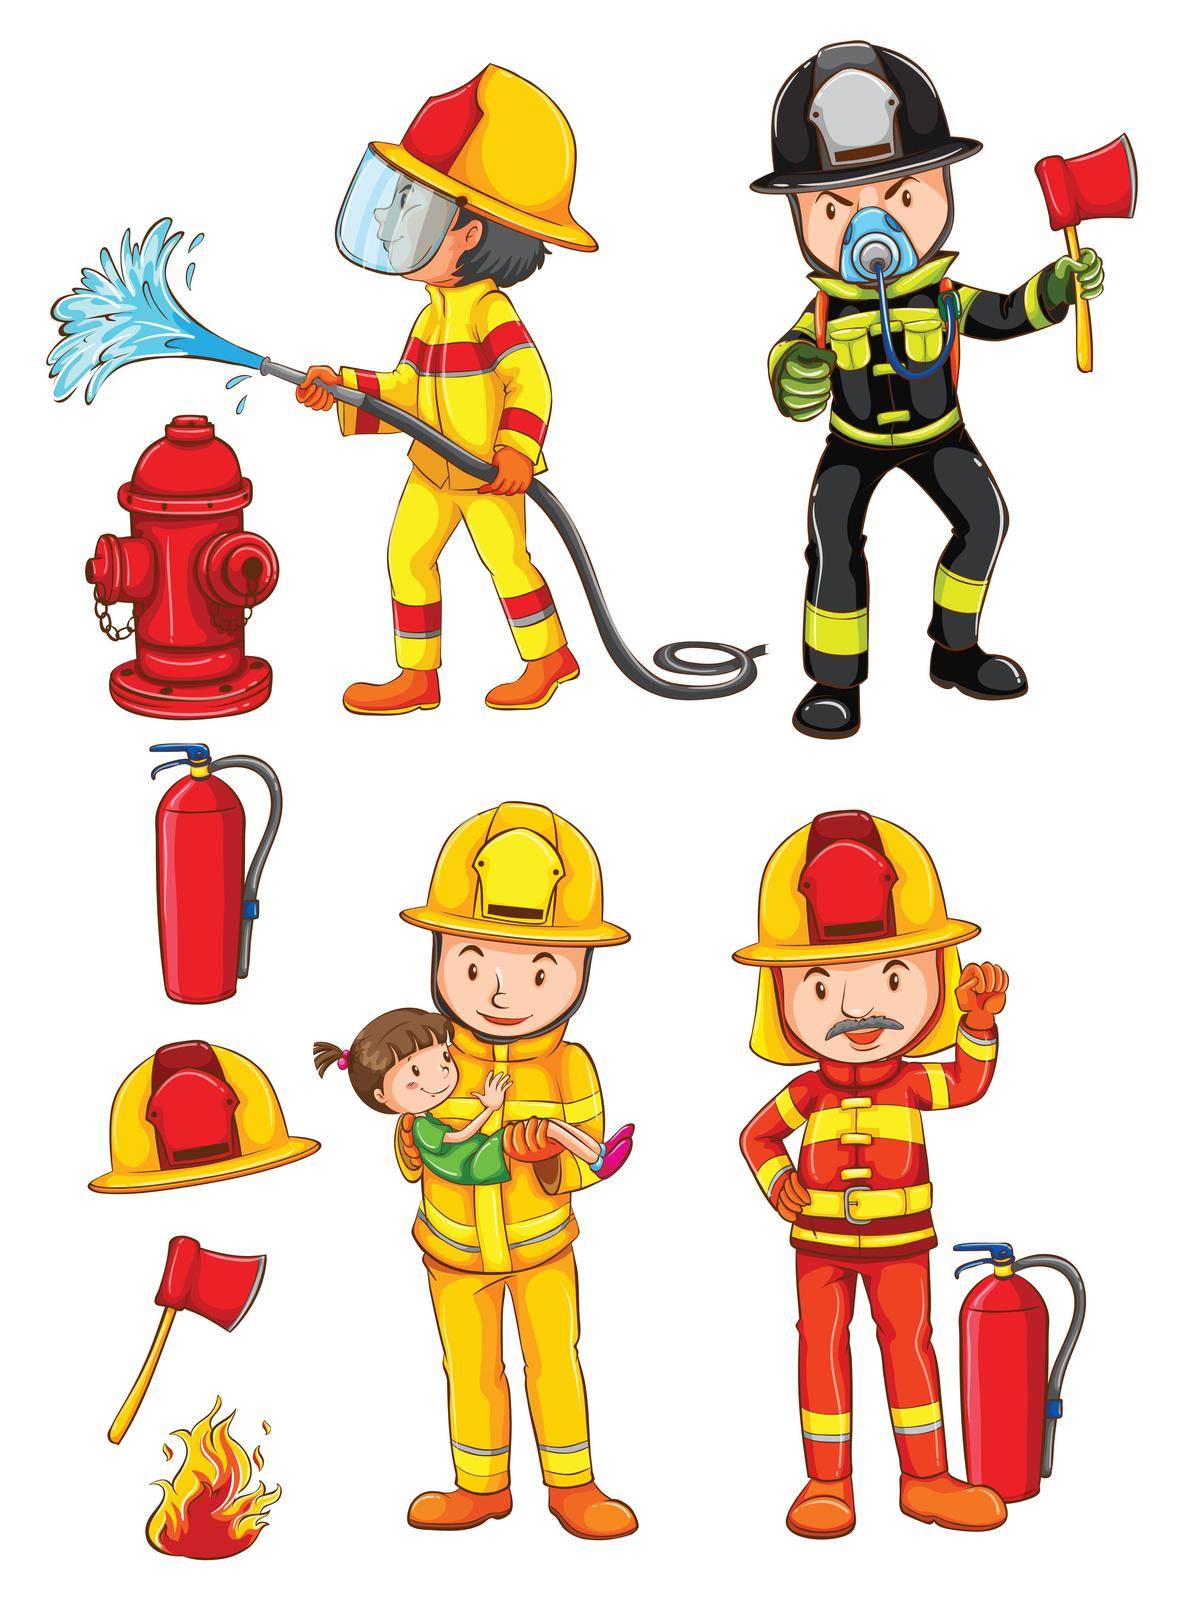 Illustration of the simple sketches of the firemen on a white background